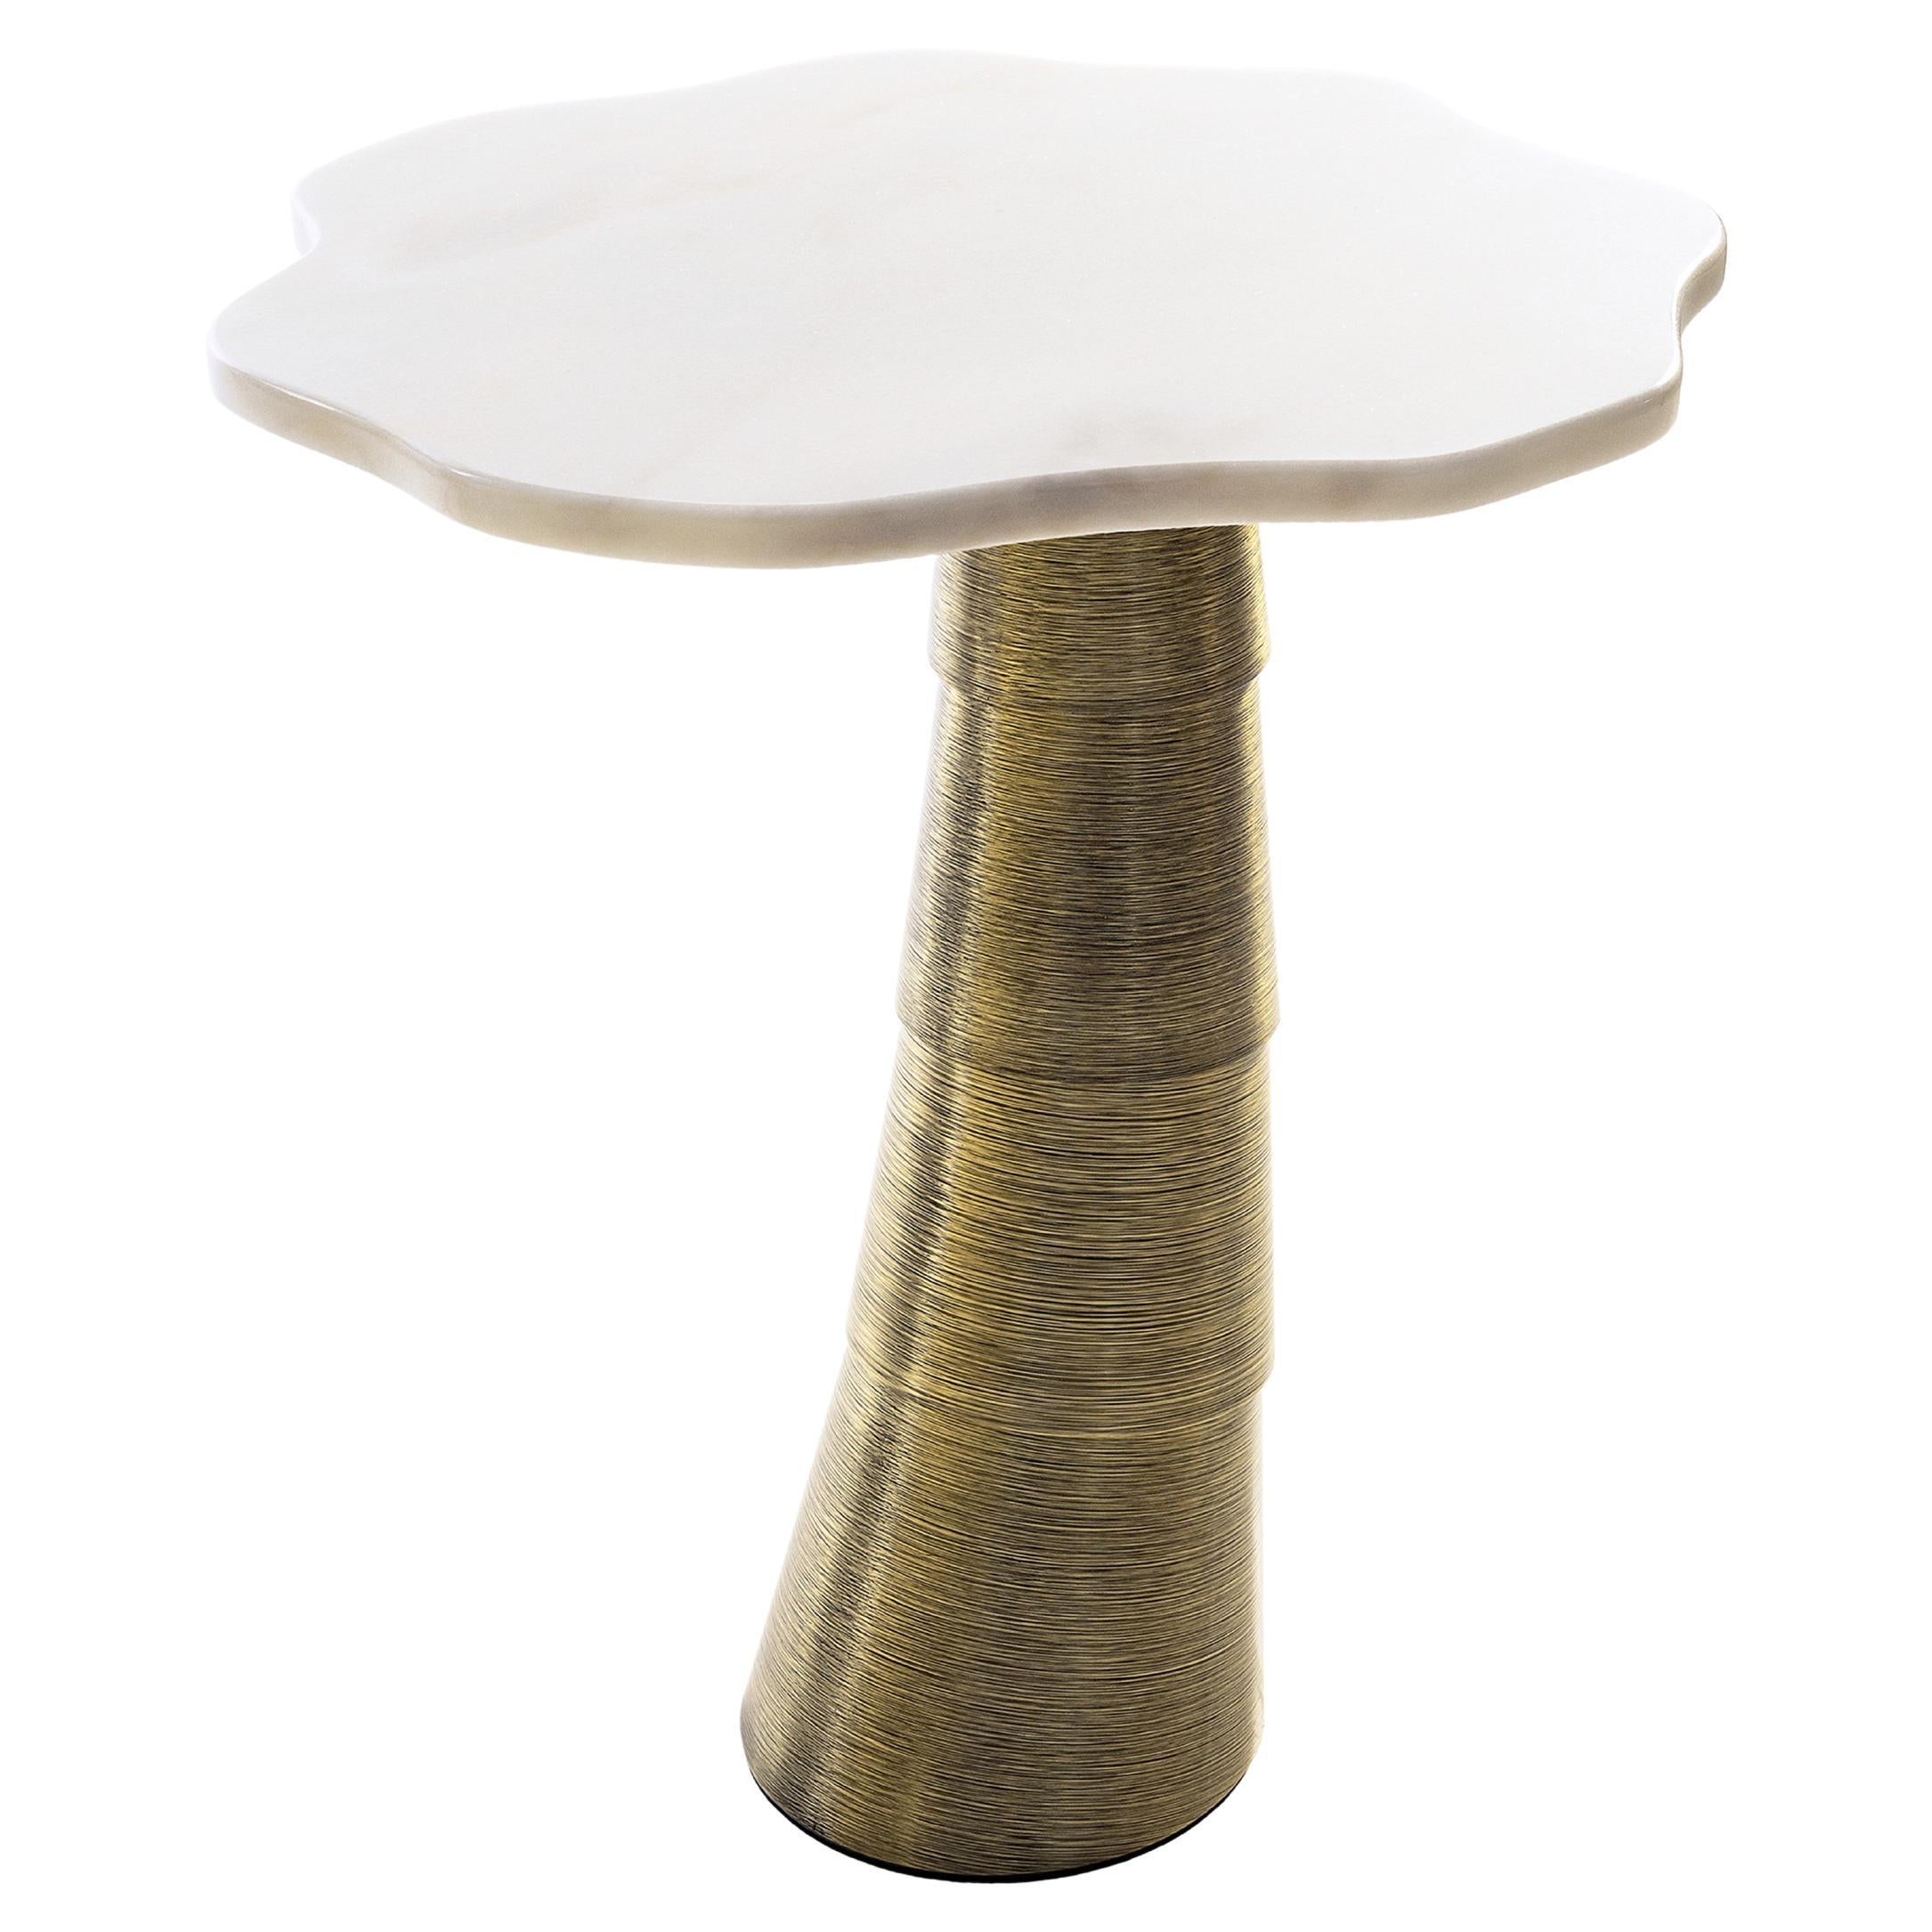 Palm Side Table, Estremoz and Brass, InsidherLand by Joana Santos Barbosa For Sale